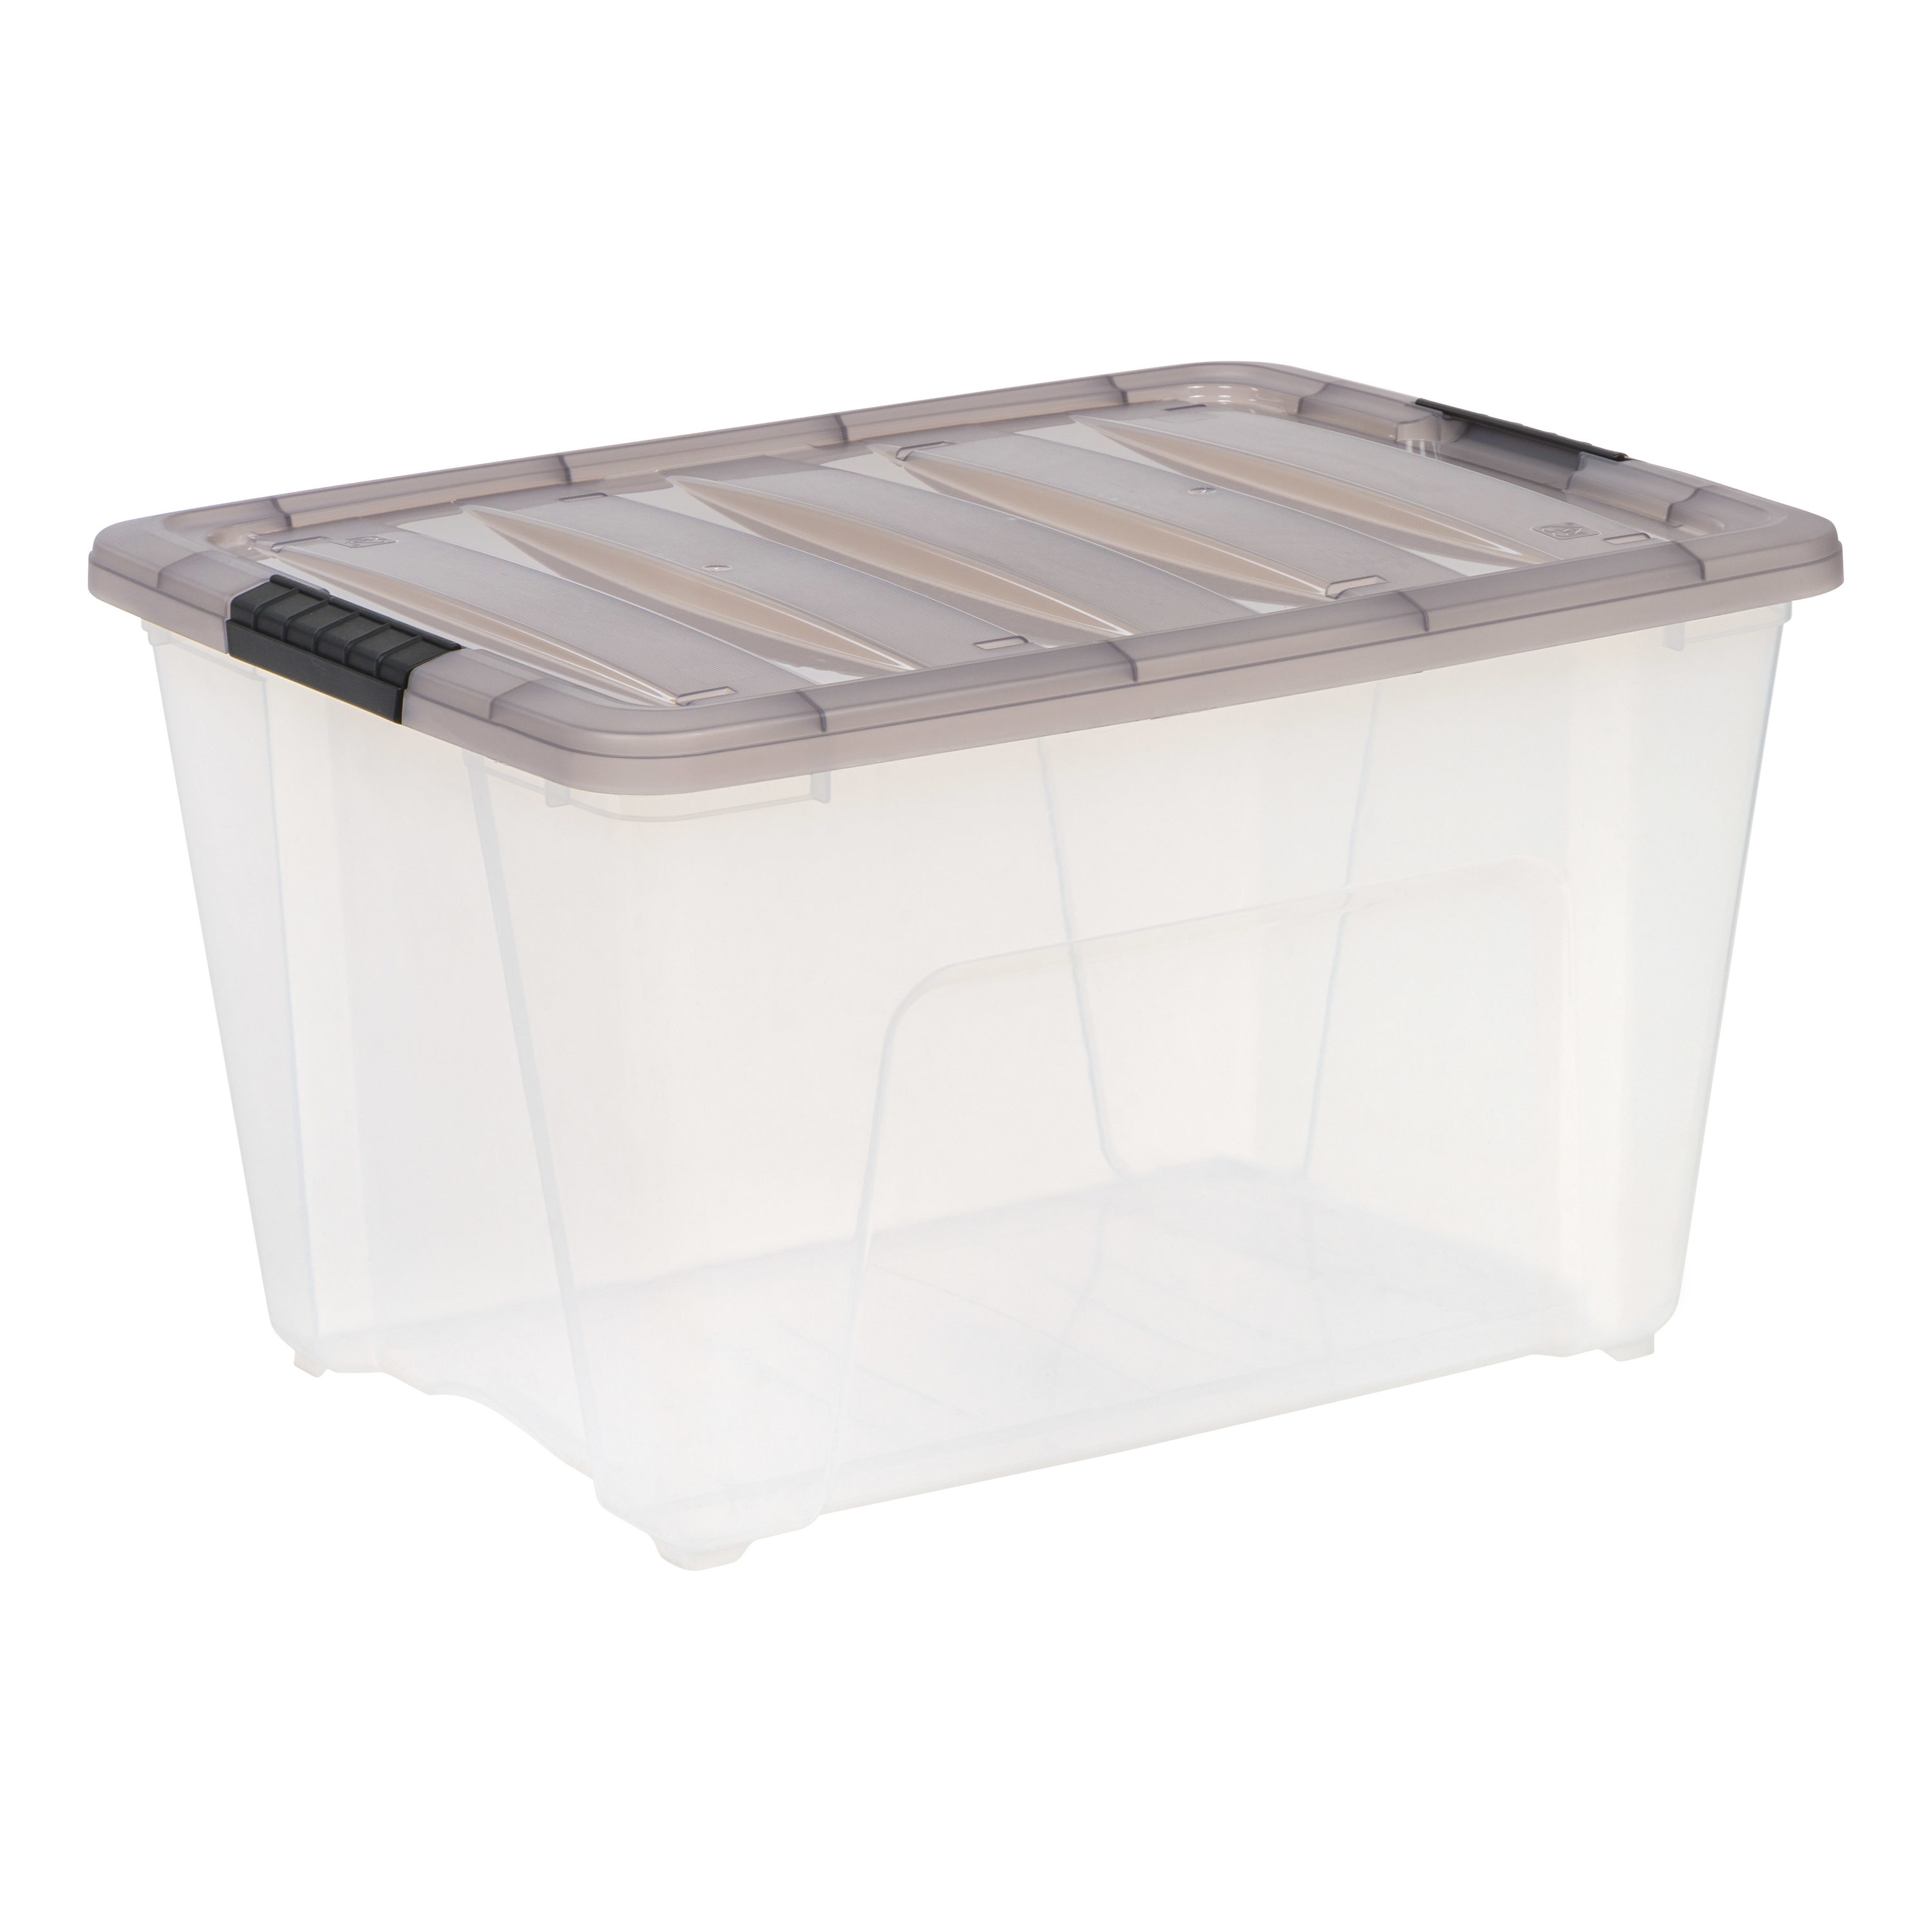 30 Inch Wide Plastic Storage Containers at